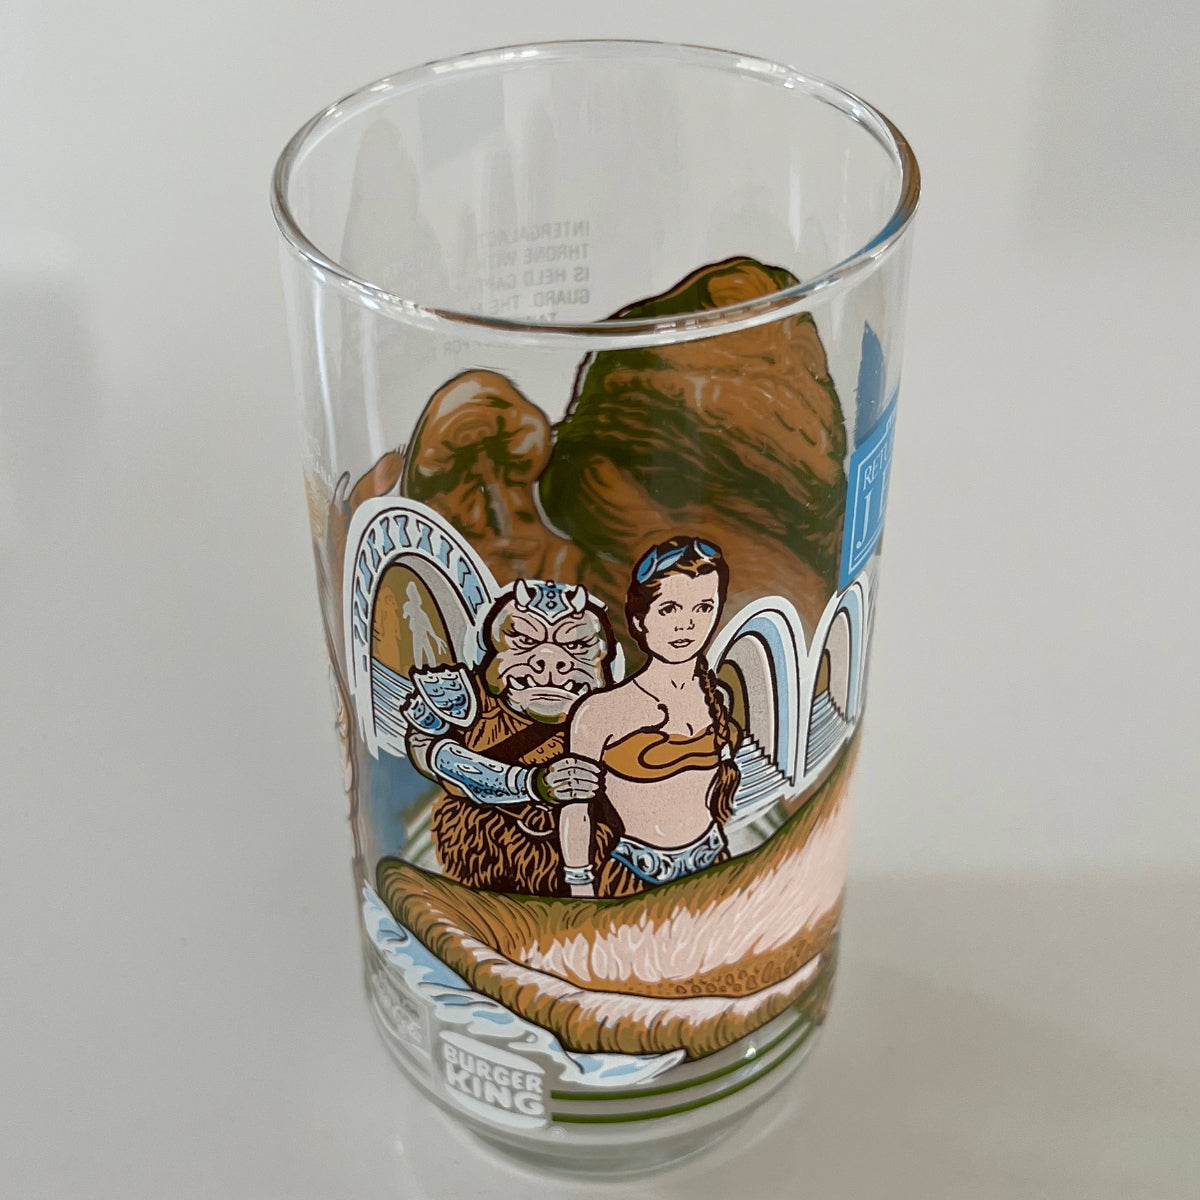 Vintage 1983 Burger King Return Of The Jedi Jabba Collectible Drinking Glass